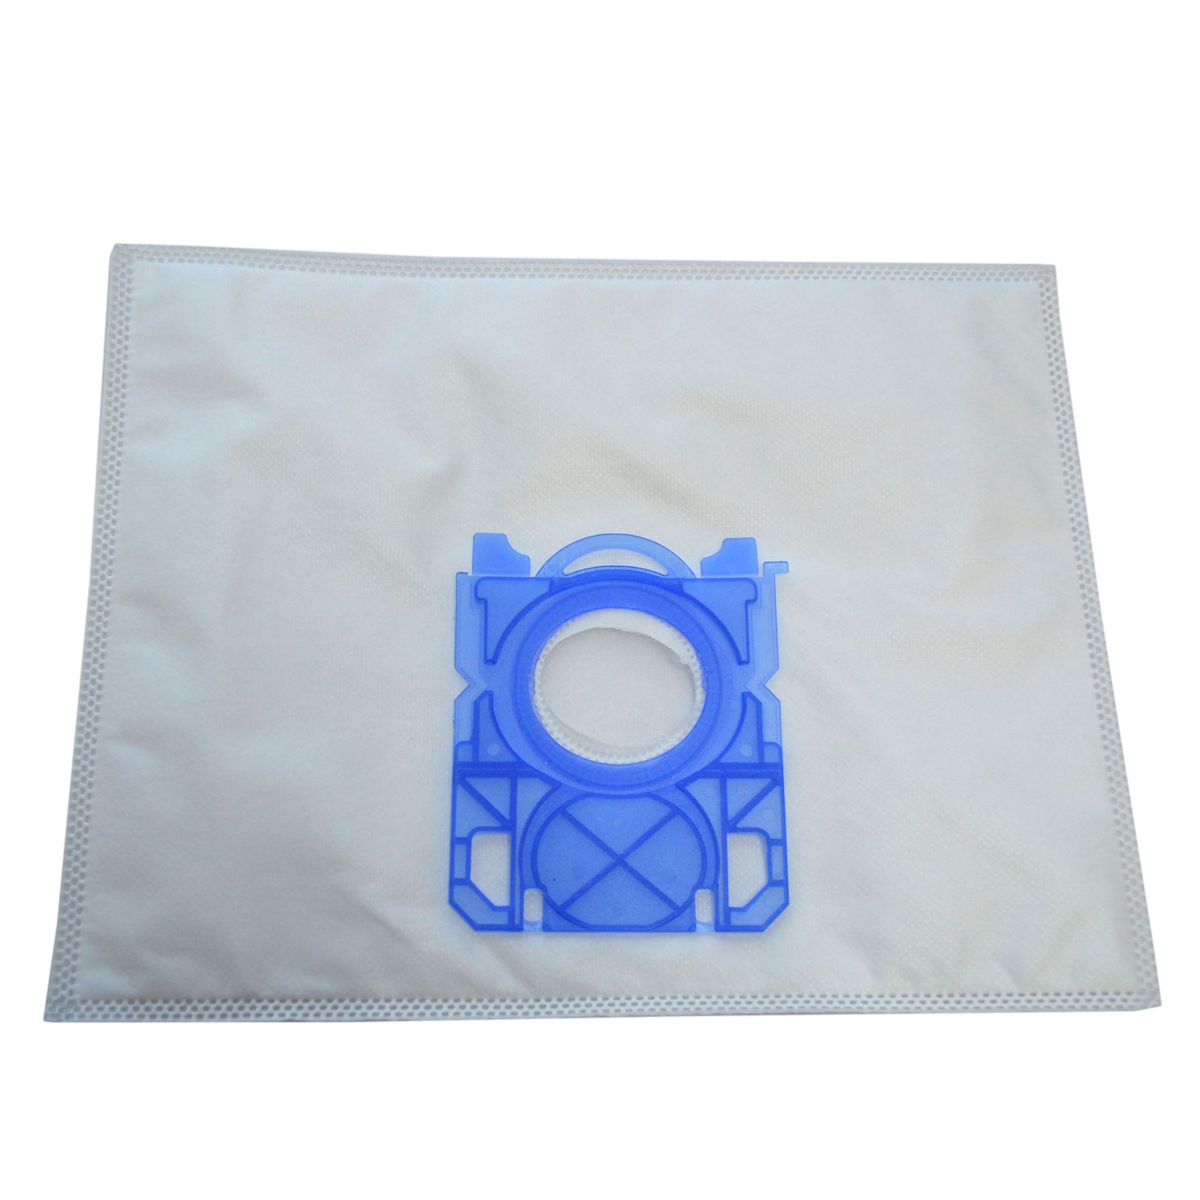 VACUUM CLEANER DUST FILTER BAG FOR PHILIPS S-BAG FC8021,FC8021/01,FC8021/02,FC8021/03,FC8022,FC8022/01.FC8023,FC8025